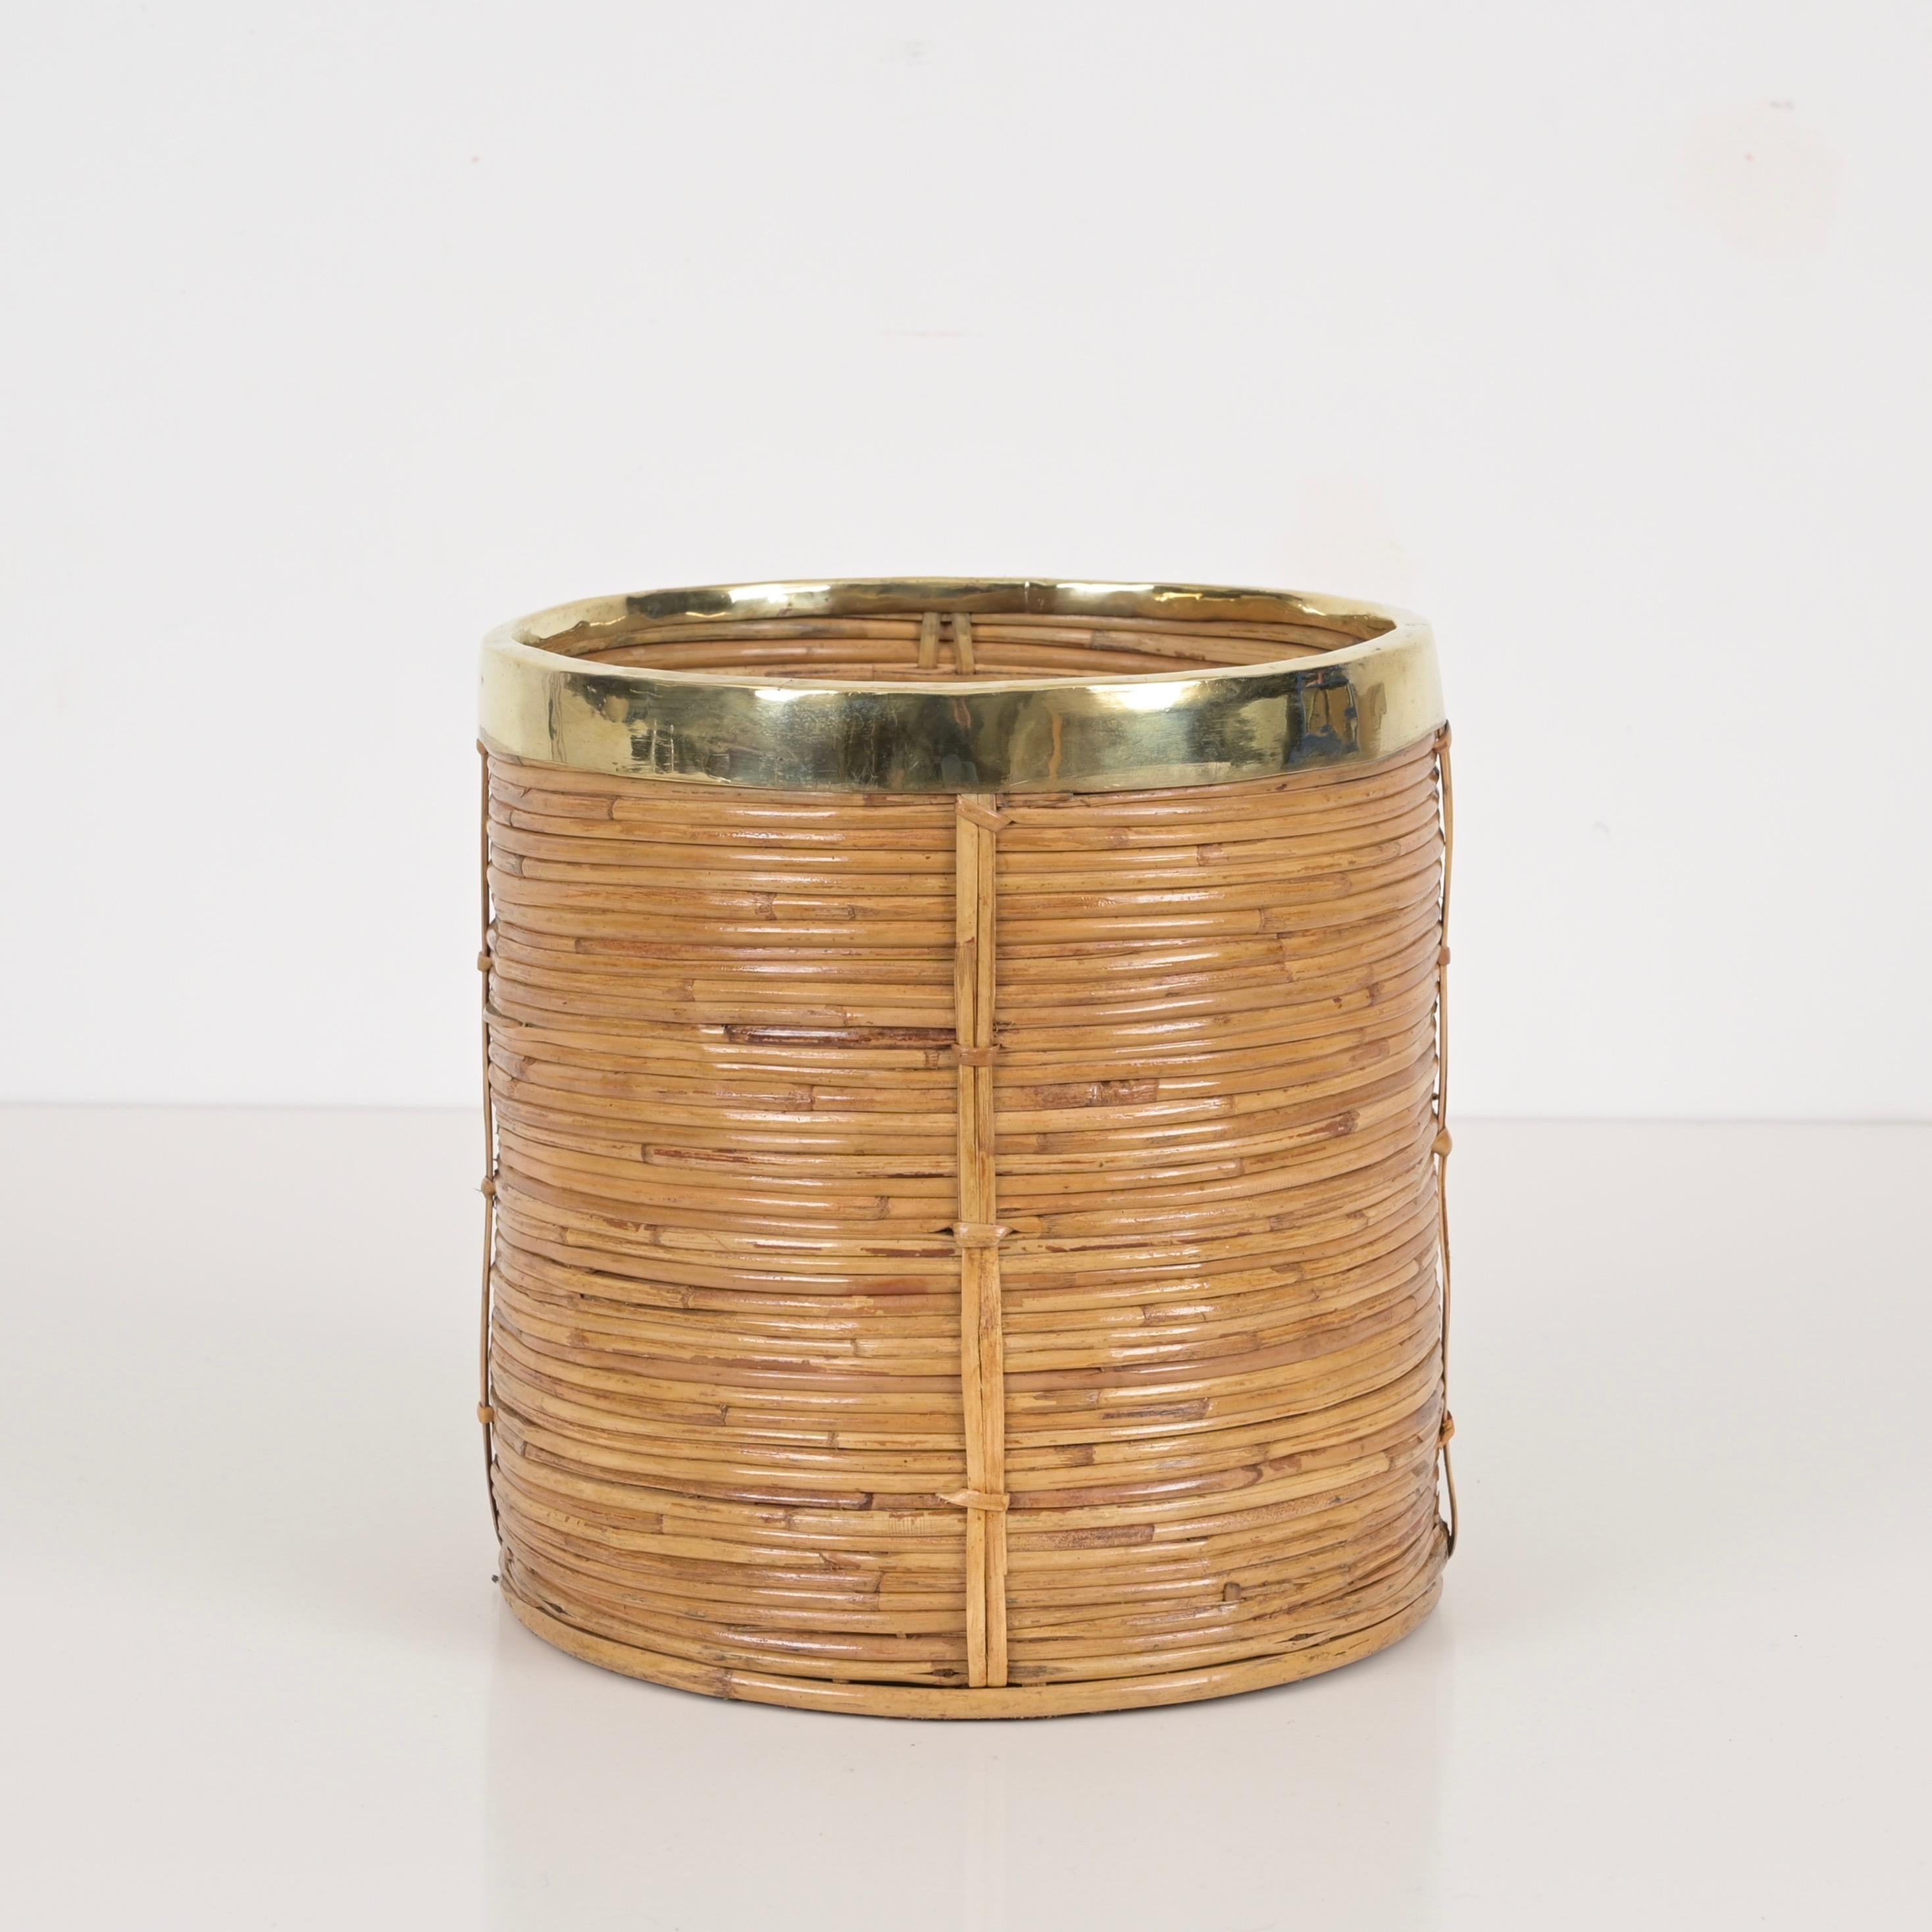 Metal Midcentury Rattan and Brass Planter or Decorative Basket, Italy 1970s For Sale